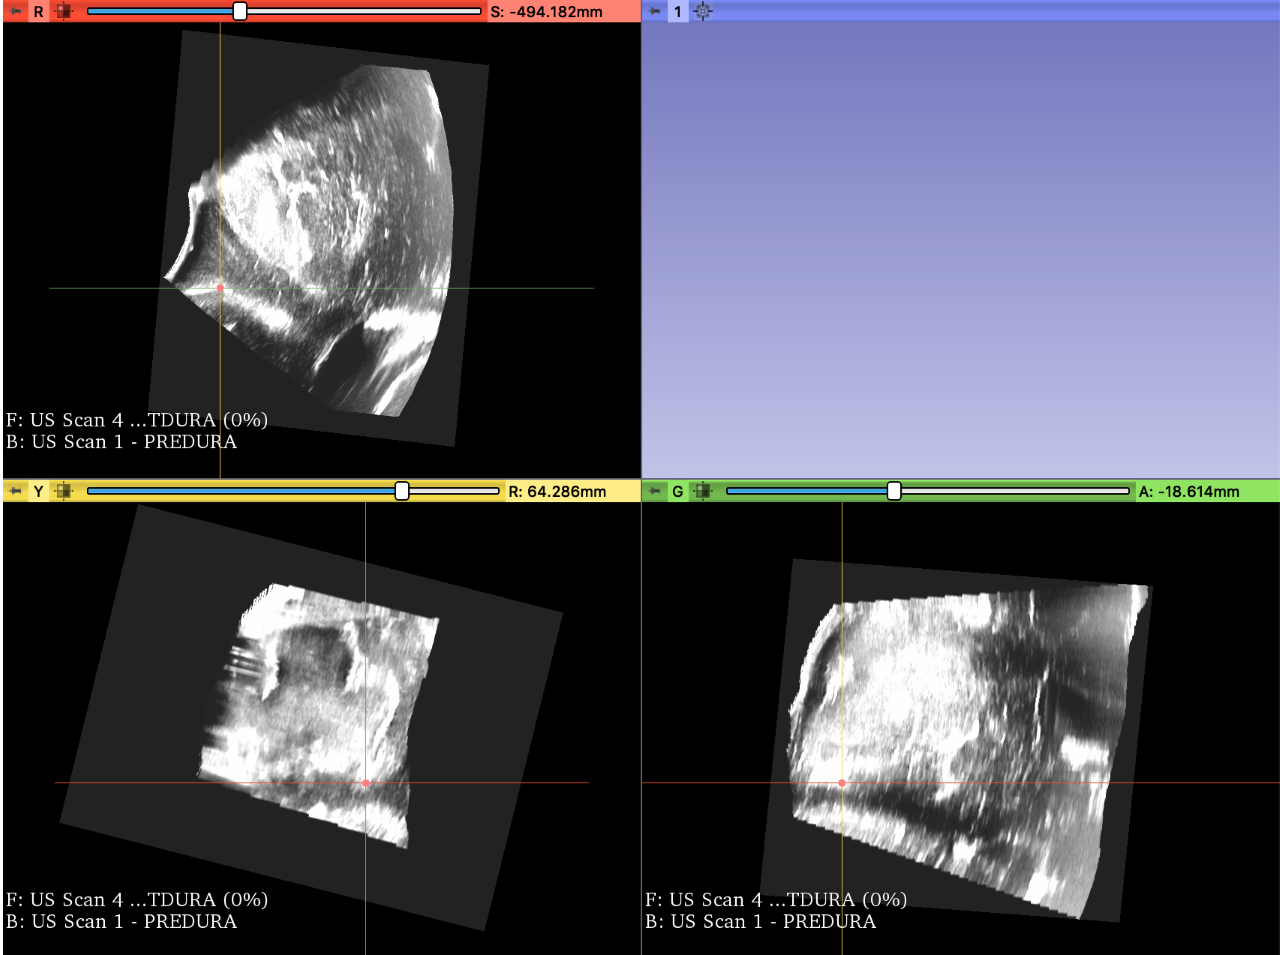 Screenshot of the pre-dura ultrasound with the fiducial on the sulcus